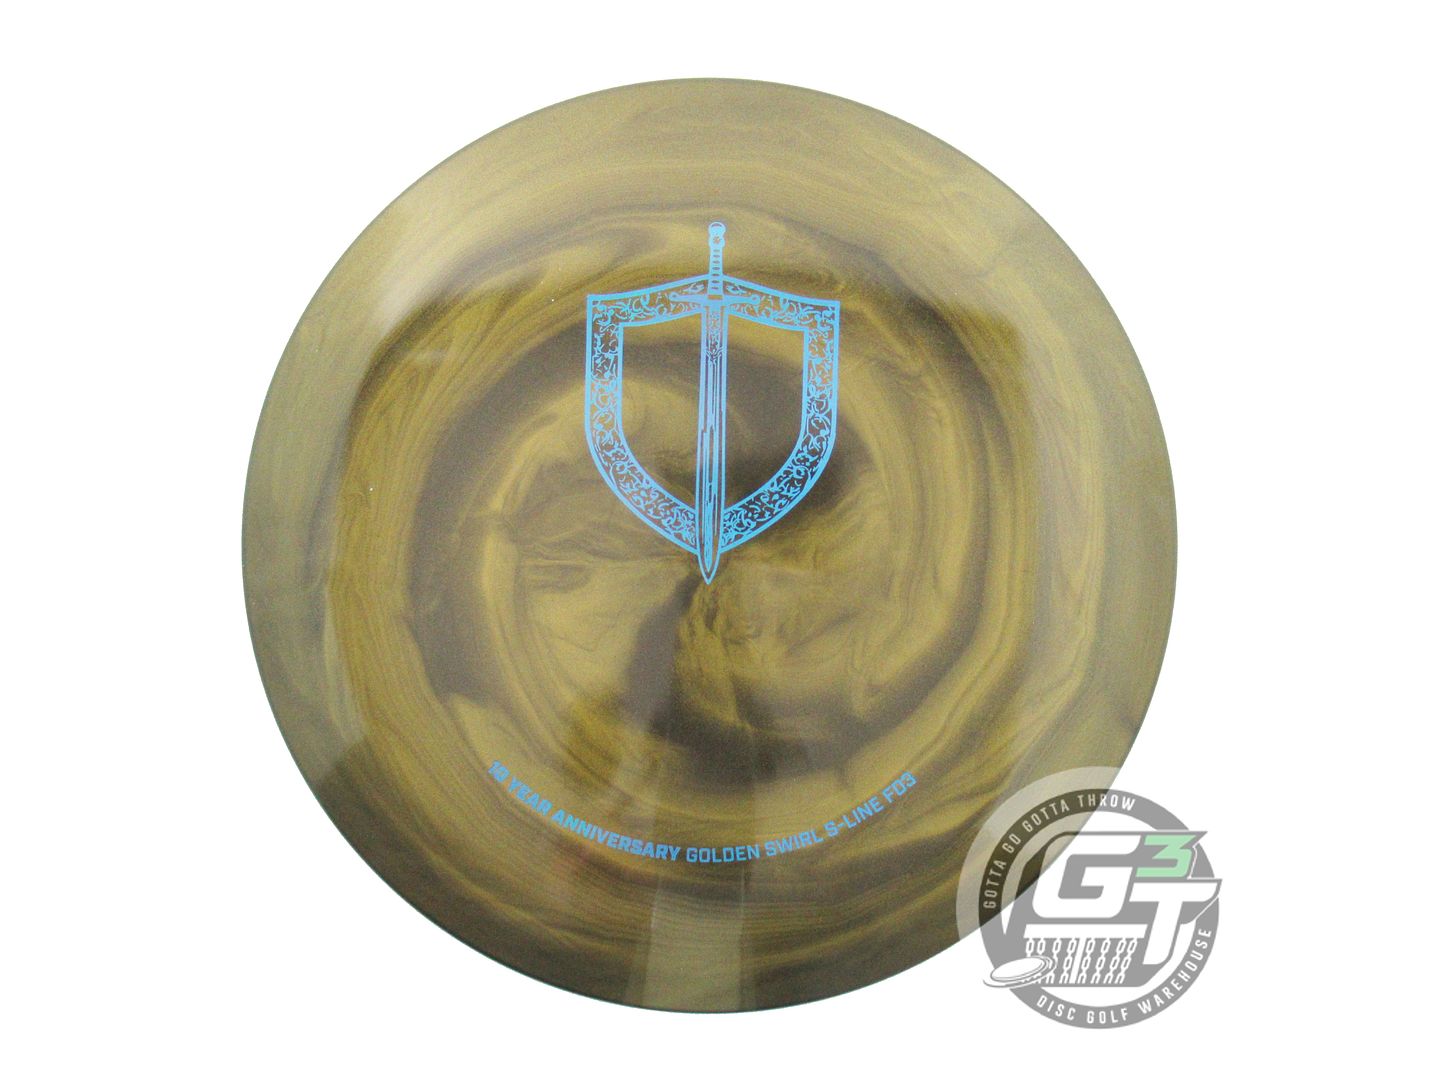 Discmania Limited Edition 10-Year Anniversary Golden Swirl S-Line FD3 Fairway Driver Golf Disc (Individually Listed)